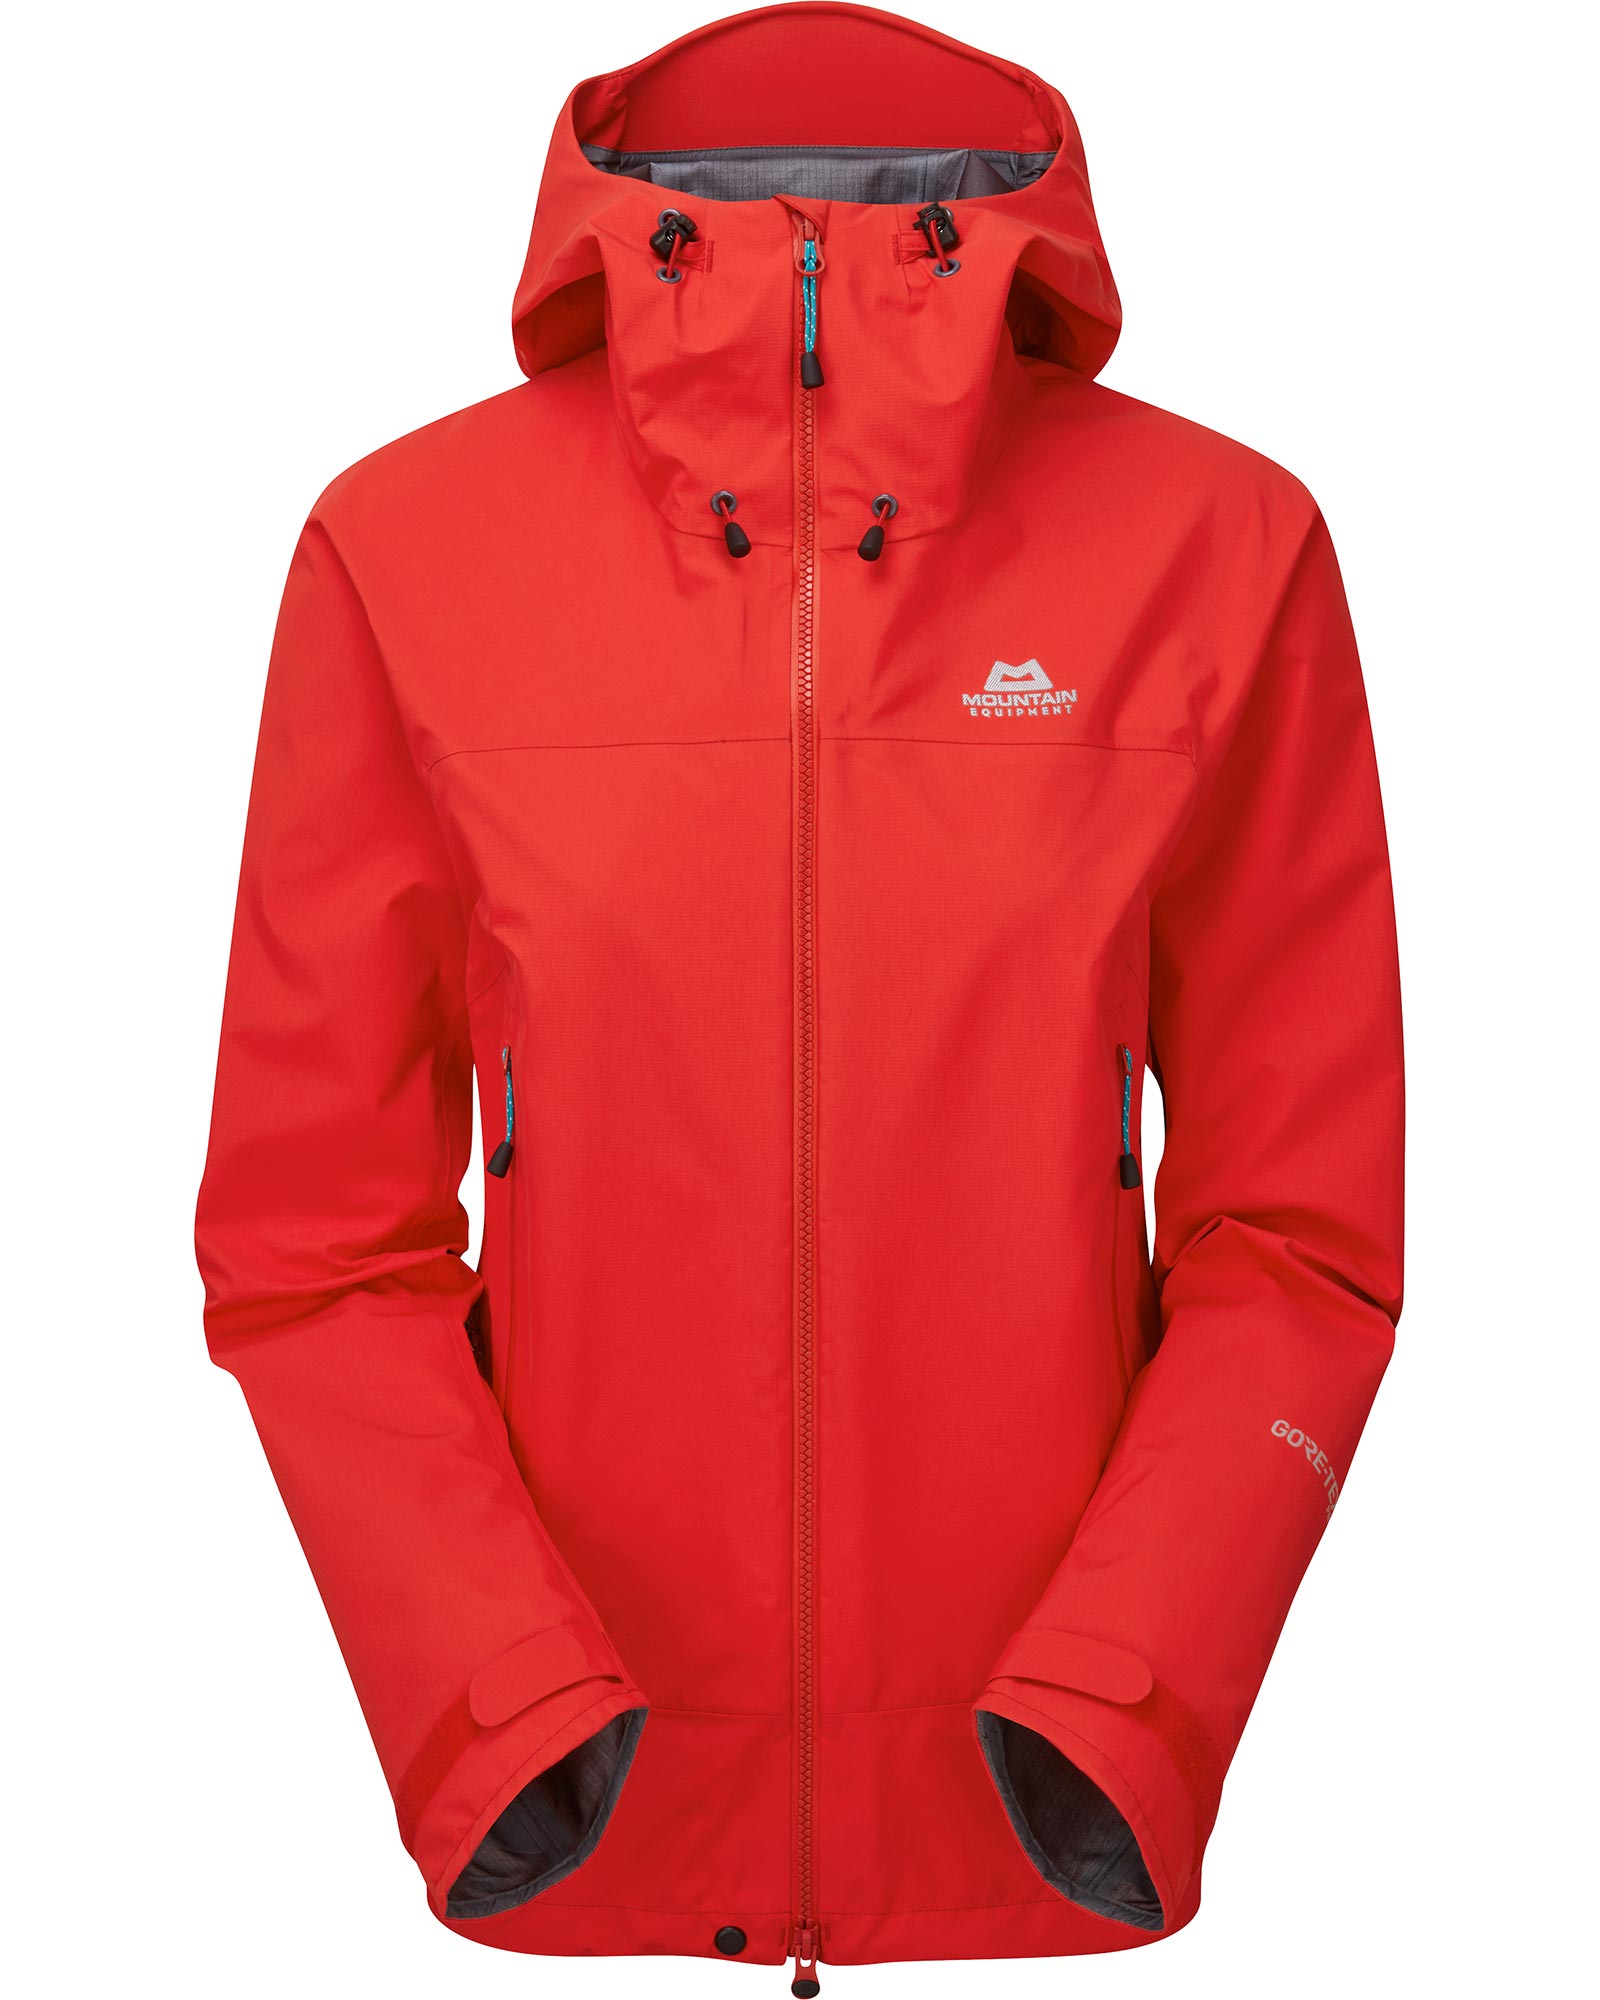 Mountain Equipment Shivling GORE TEX Pro Women’s Jacket - Imperial Red 14